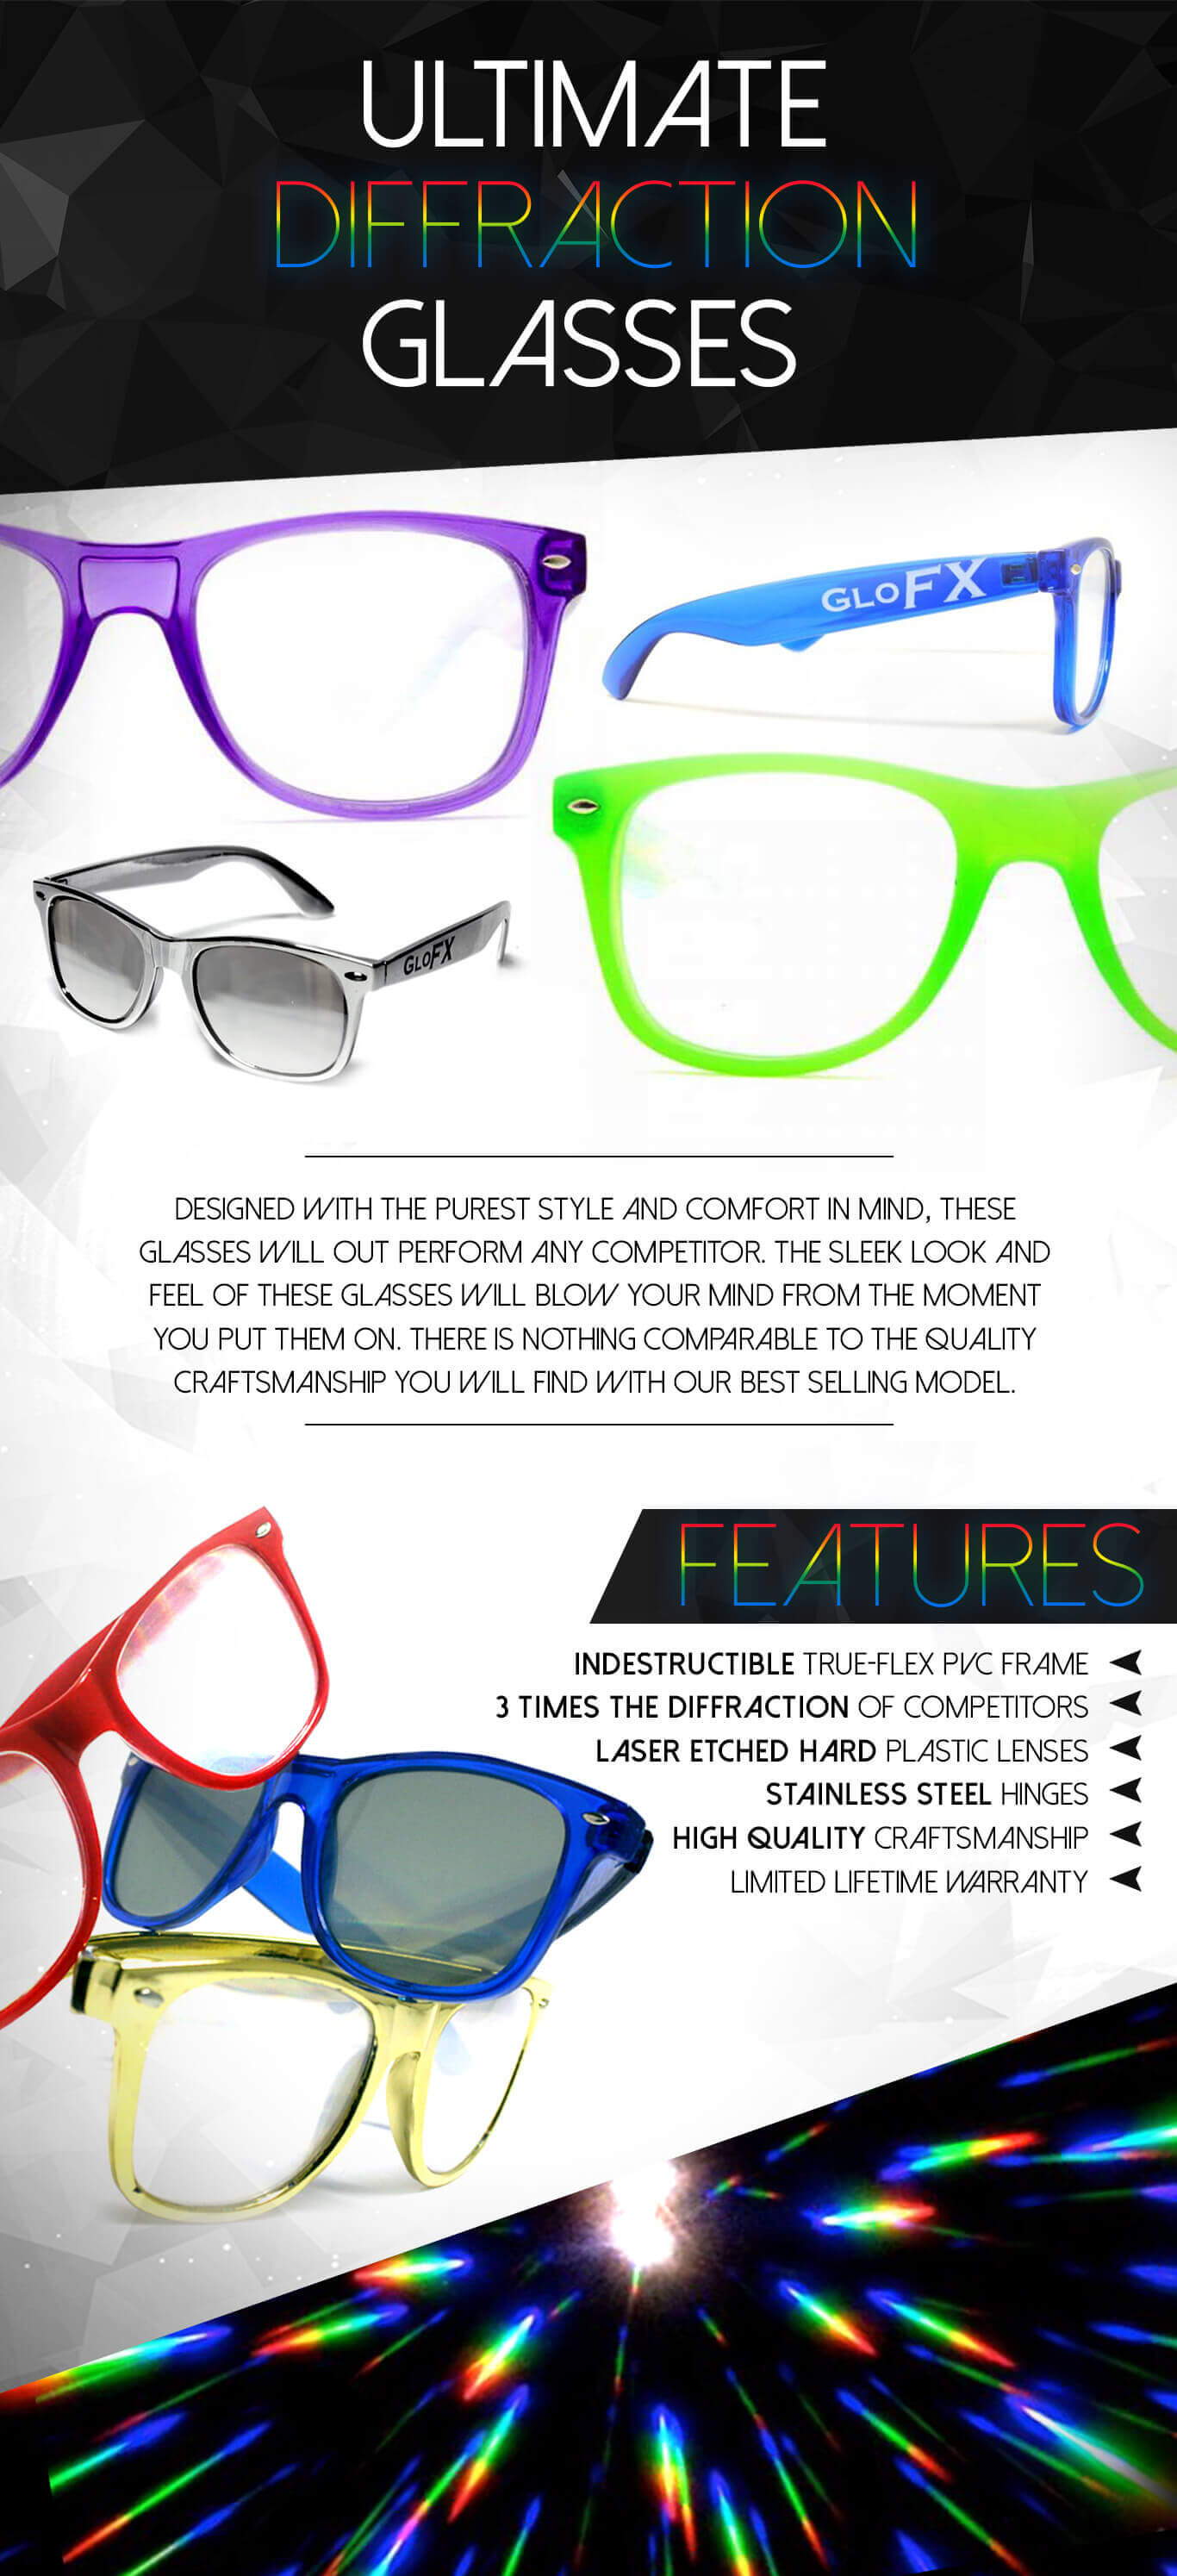 Ultimate Diffraction Glasses Category Admat